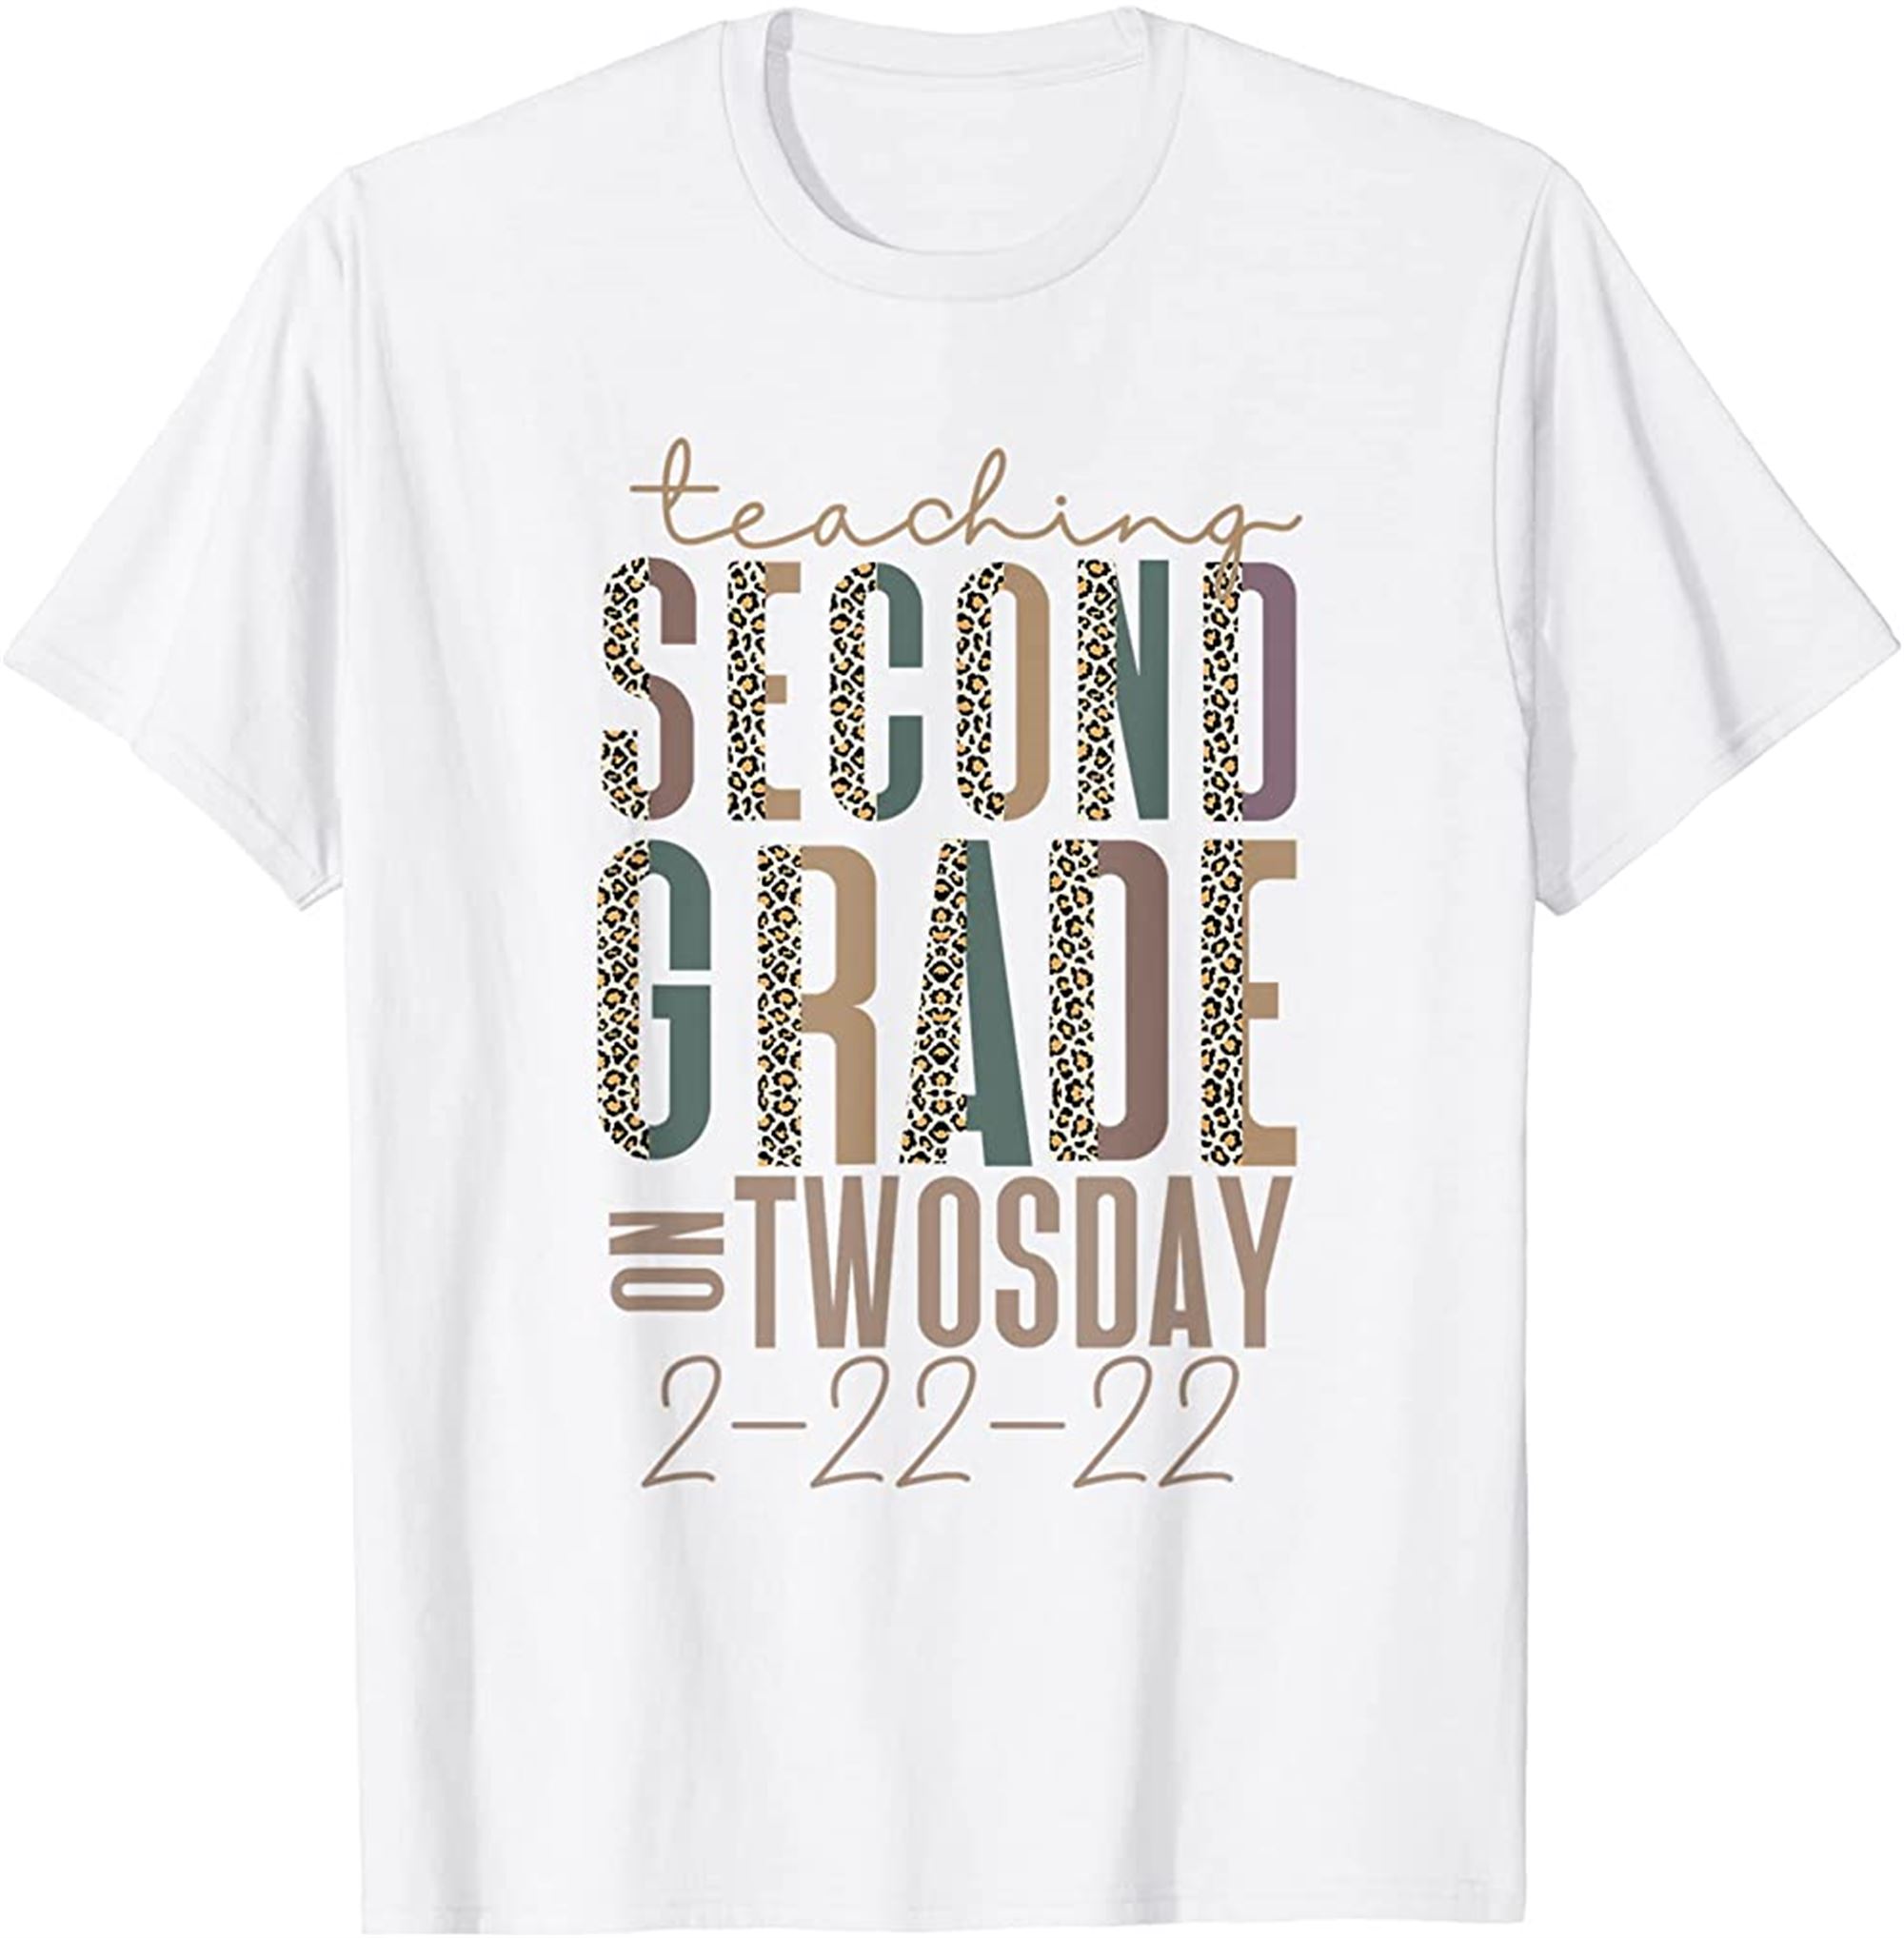 Teaching 2nd Grade On Twosday 2 22 22 February 22 2022 Tshirt Plus Size Up To 5xl